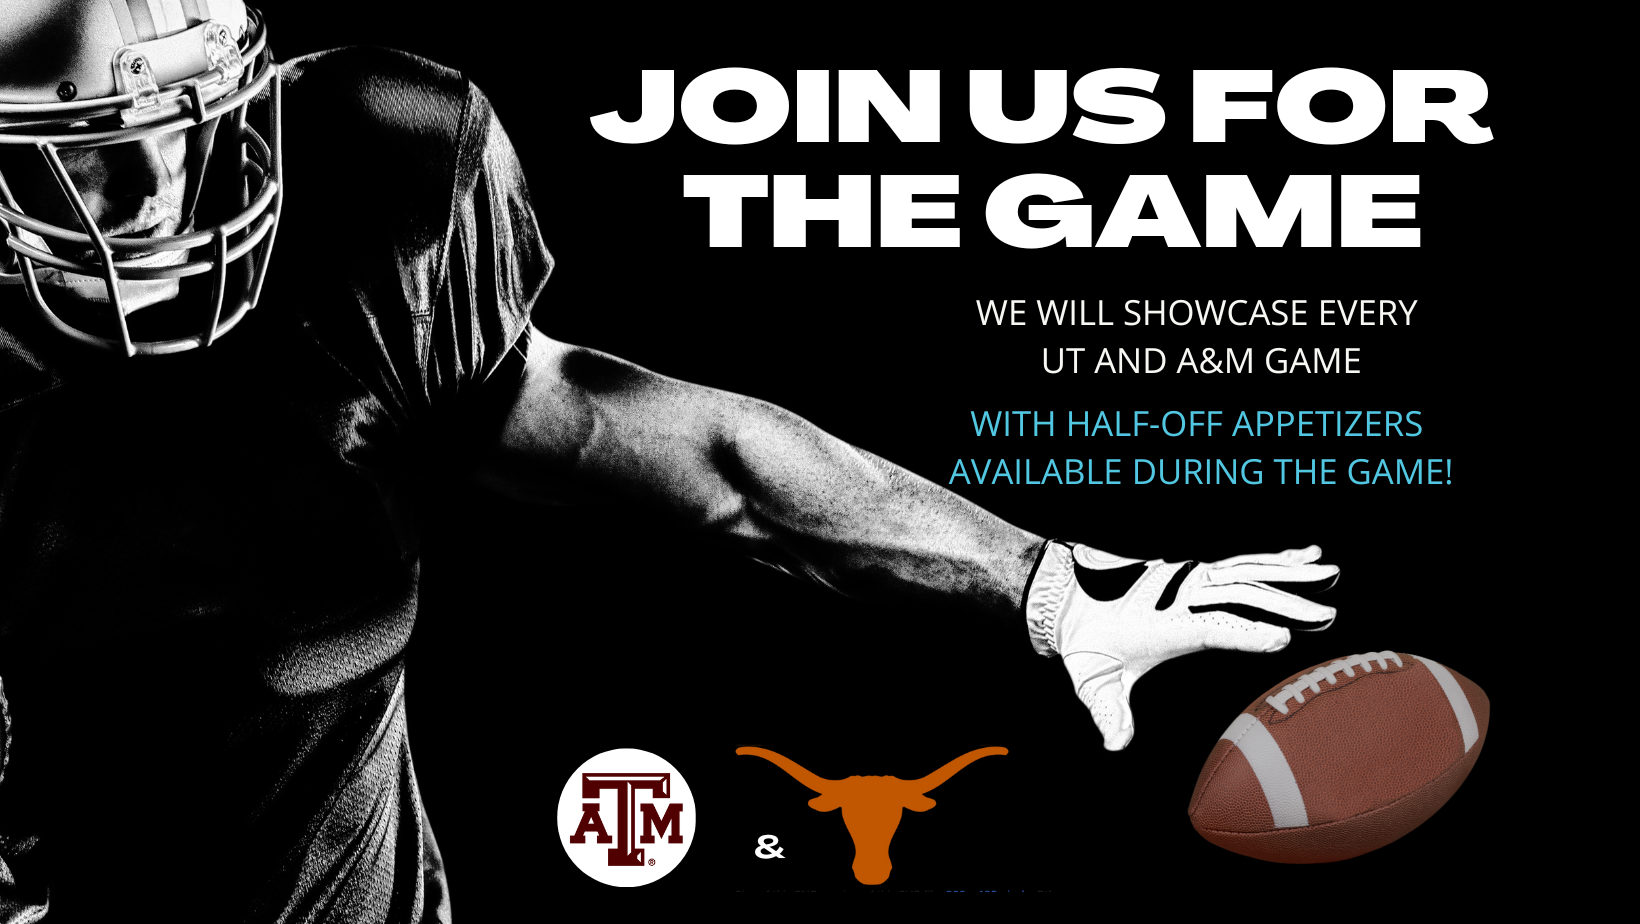 game time image advertising half off appetizers during Ut and A&M game.